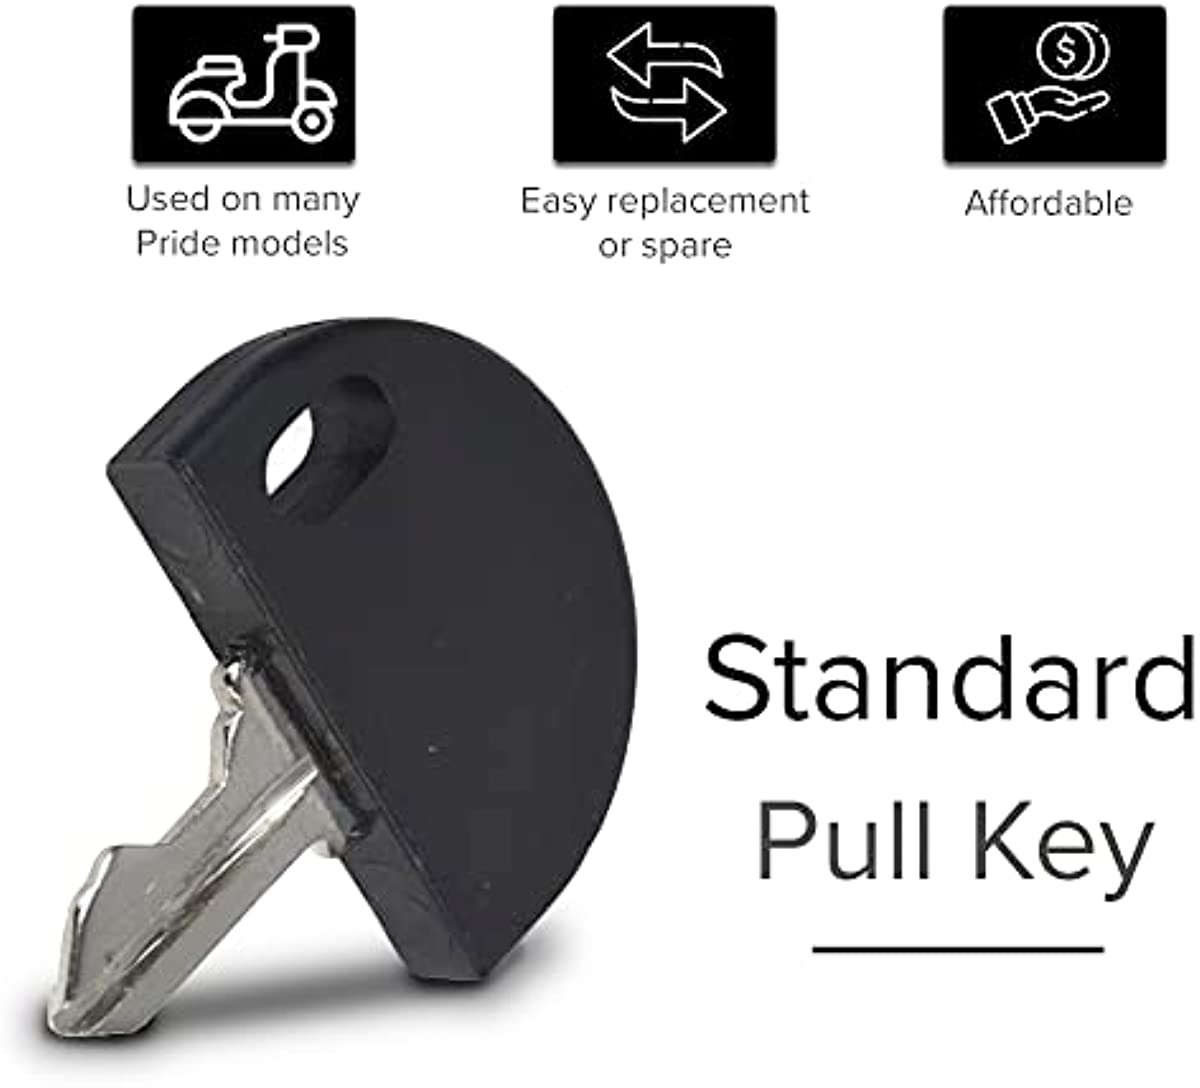 AlveyTech Standard Pull Key - for The Go-Go Elite Traveller, Ultra X, Sport, Pride Electric Power Scooters, Medical Travel Scooter Parts/Accessories for Seniors/Adults, Folding Mobility Wheel Chair